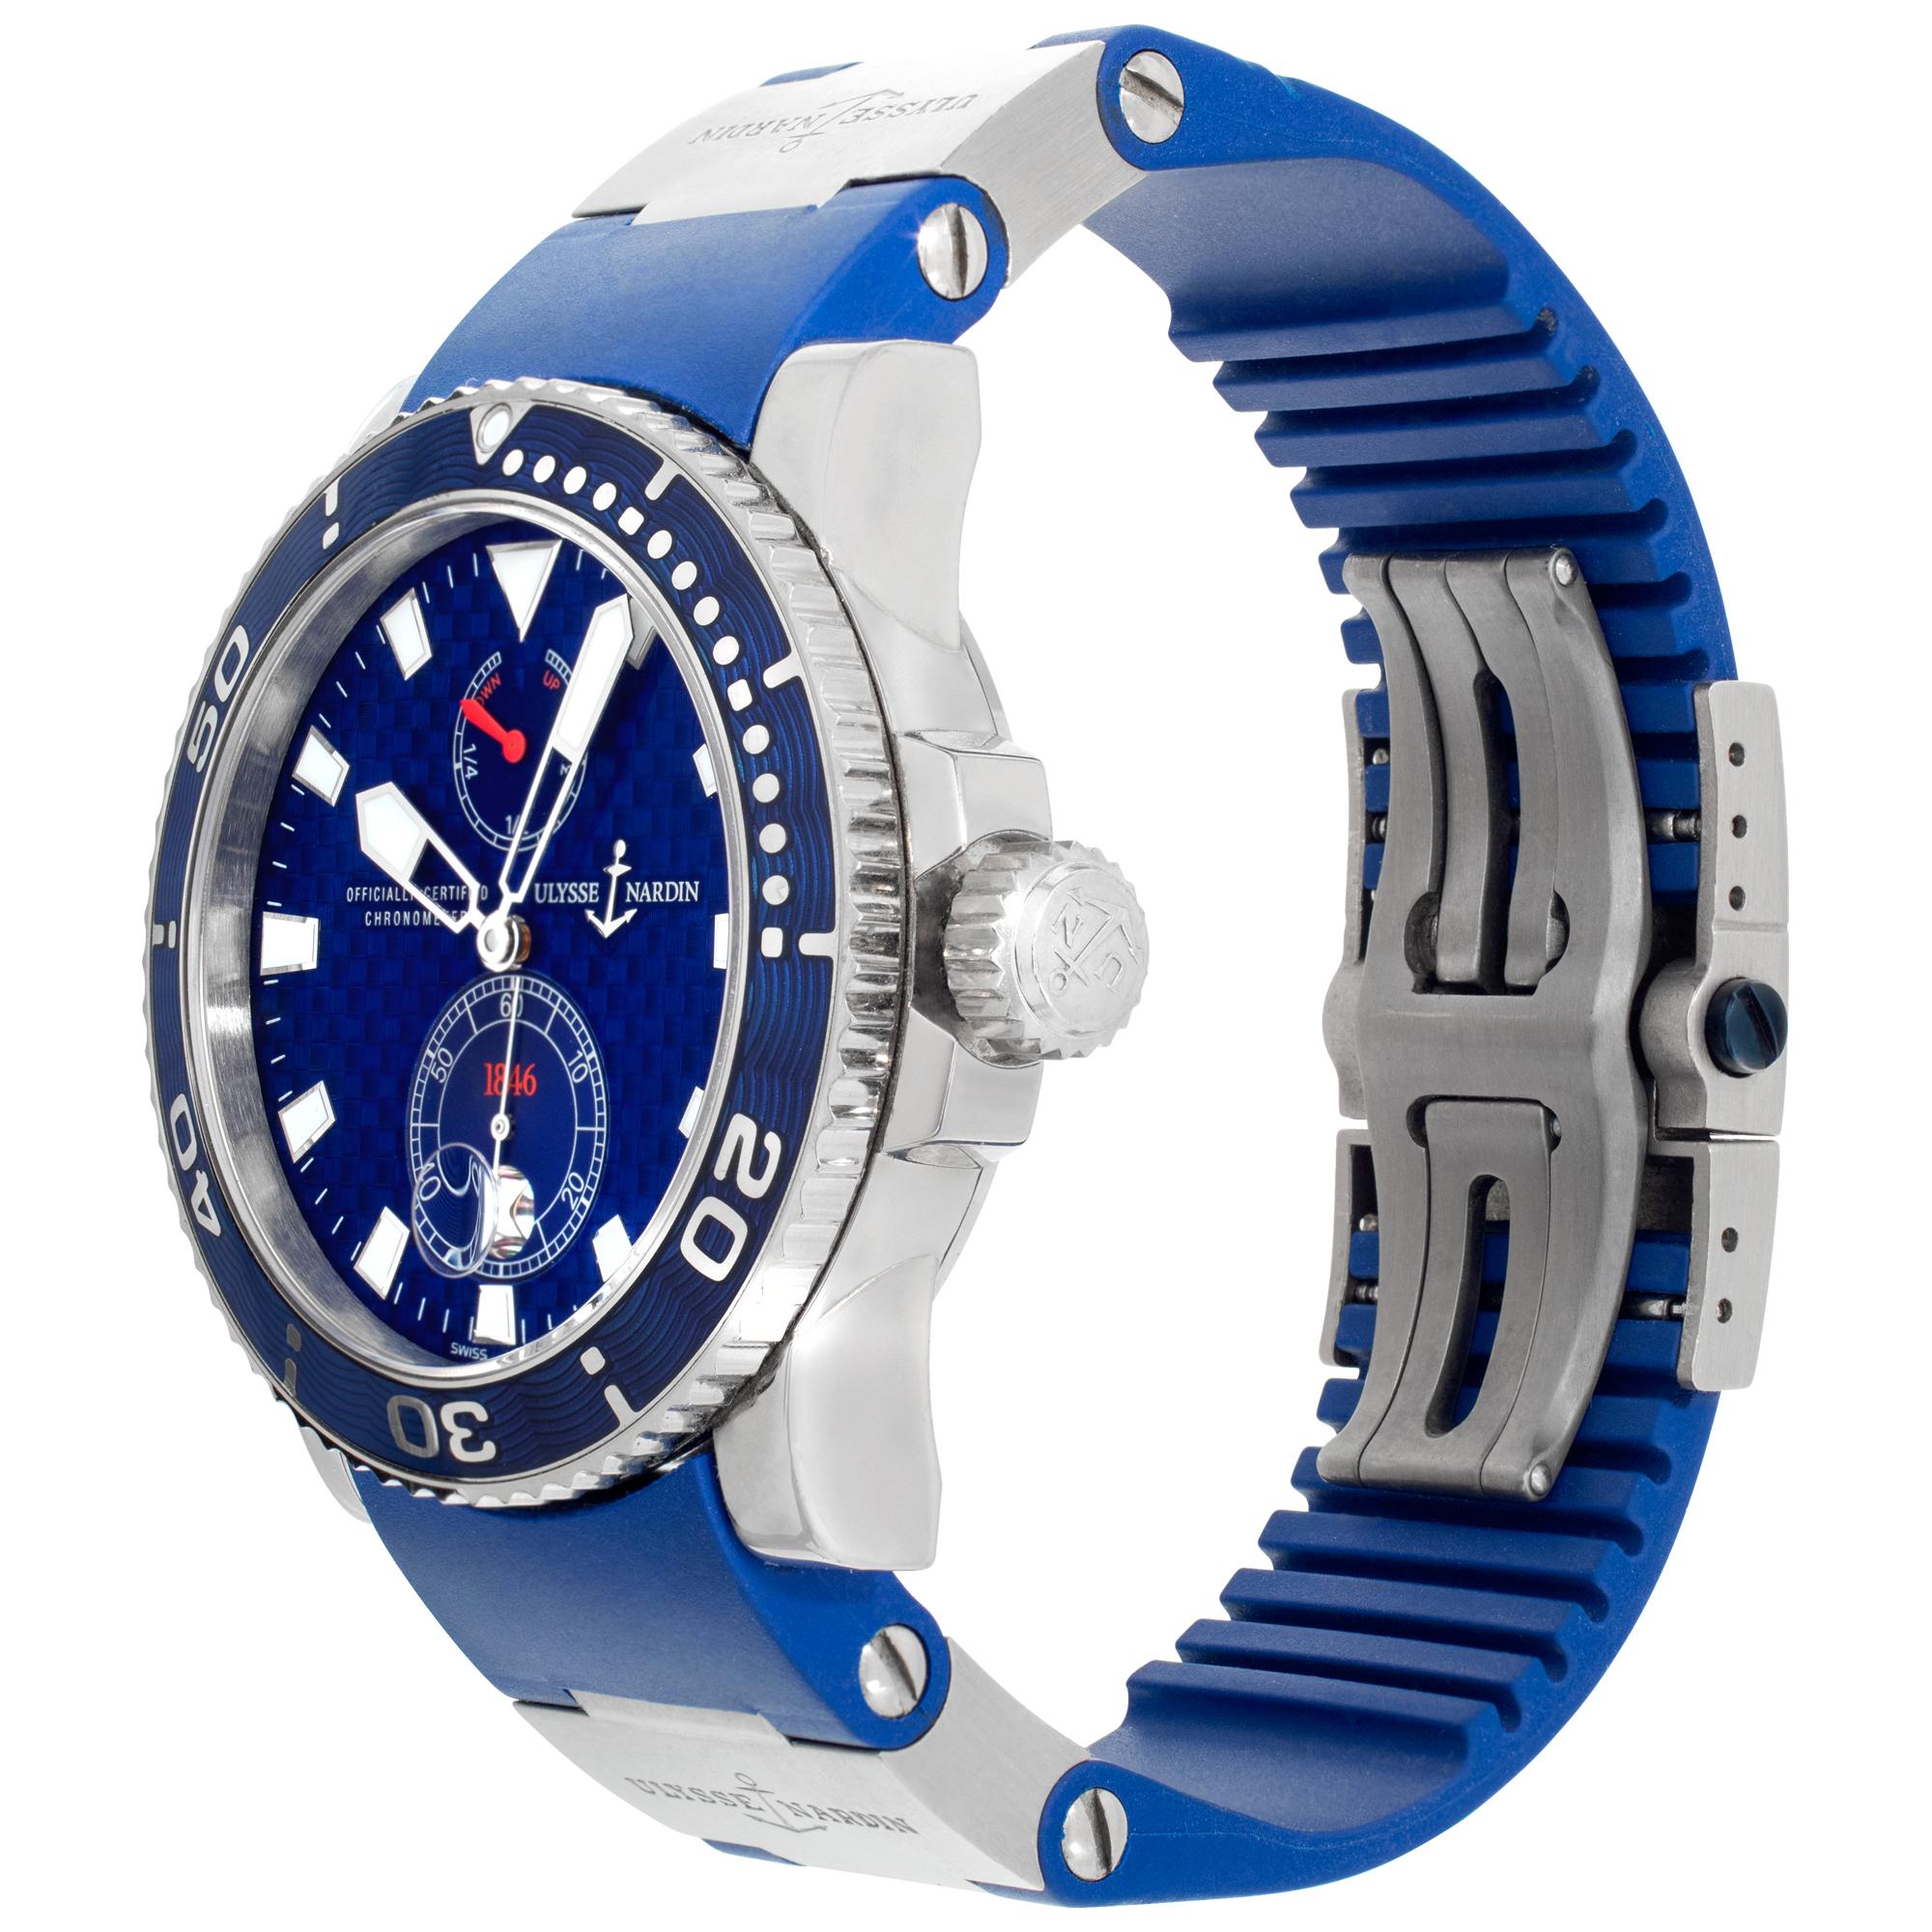 Limited Edition Ulysse Nardin Marine Diver in 18k white gold with blue dial, bezel and rubber strap. Automtaic movement under glass w/ subseconds, date and power reserve. 42.5 mm case size. With box and booklets. Ref 260-32-3a. Circs 2010s. Fine